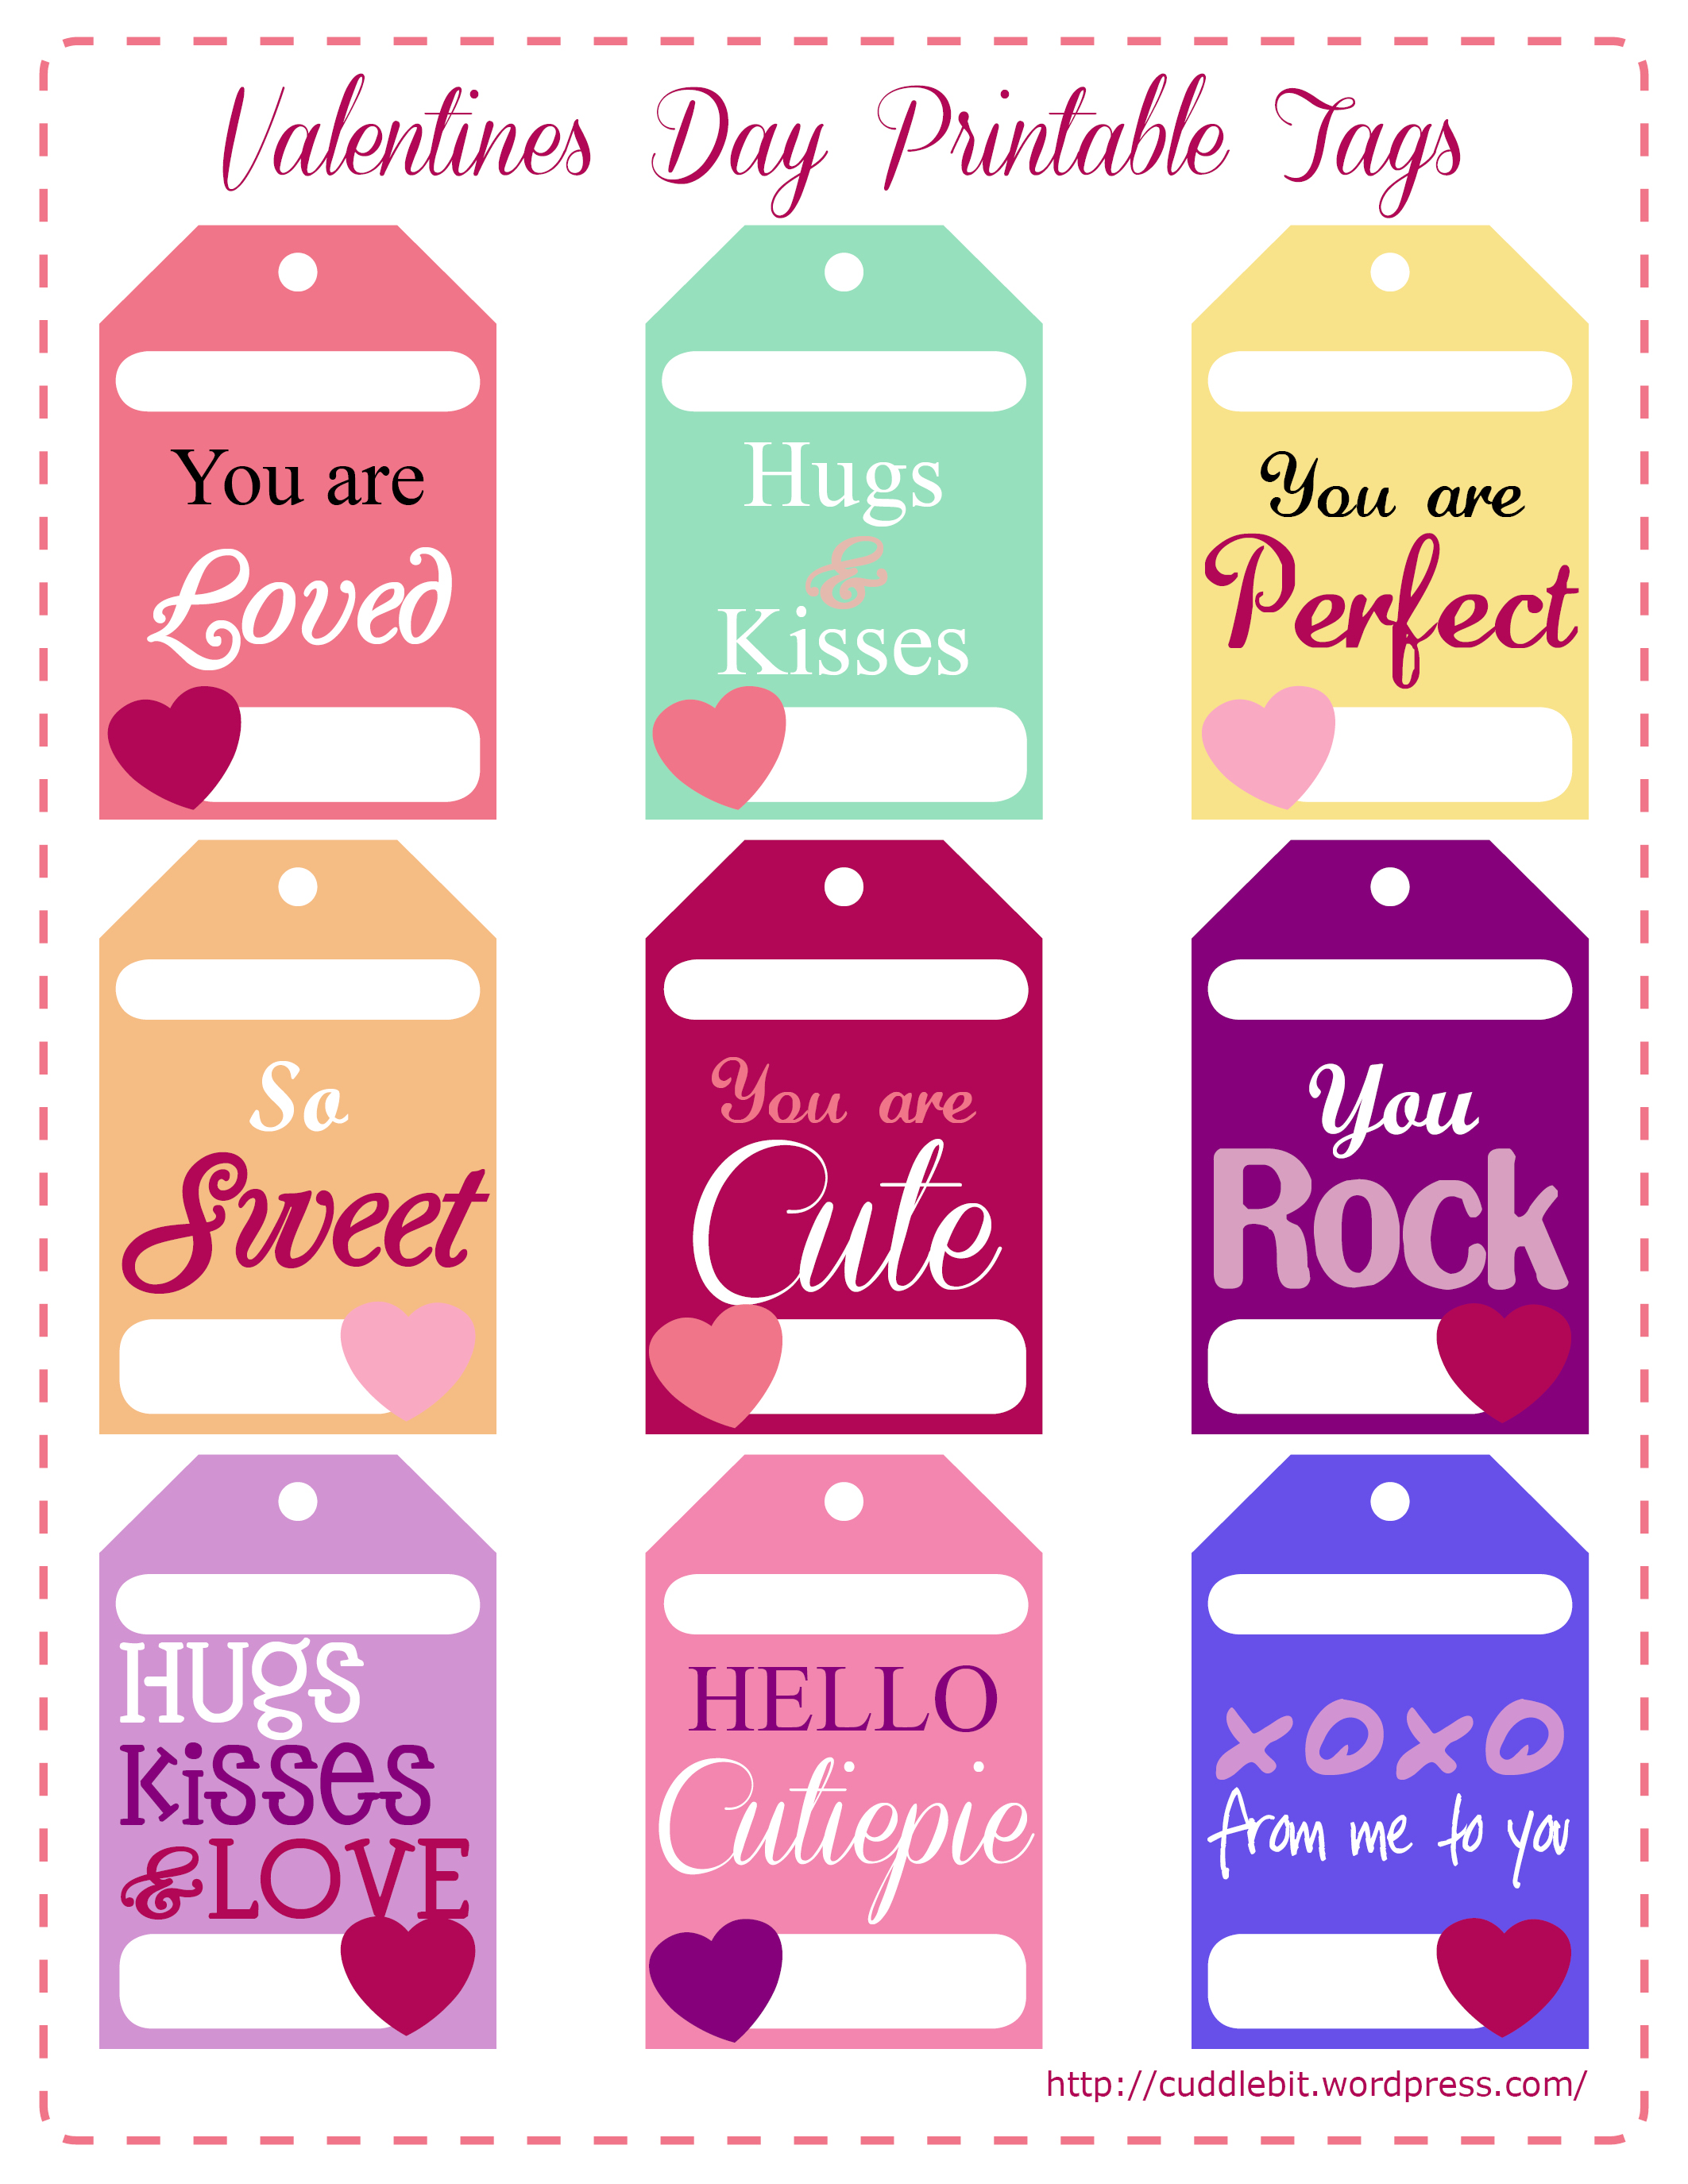 9 Best Images of Candy Valentine Day Printable Tags Free Printable